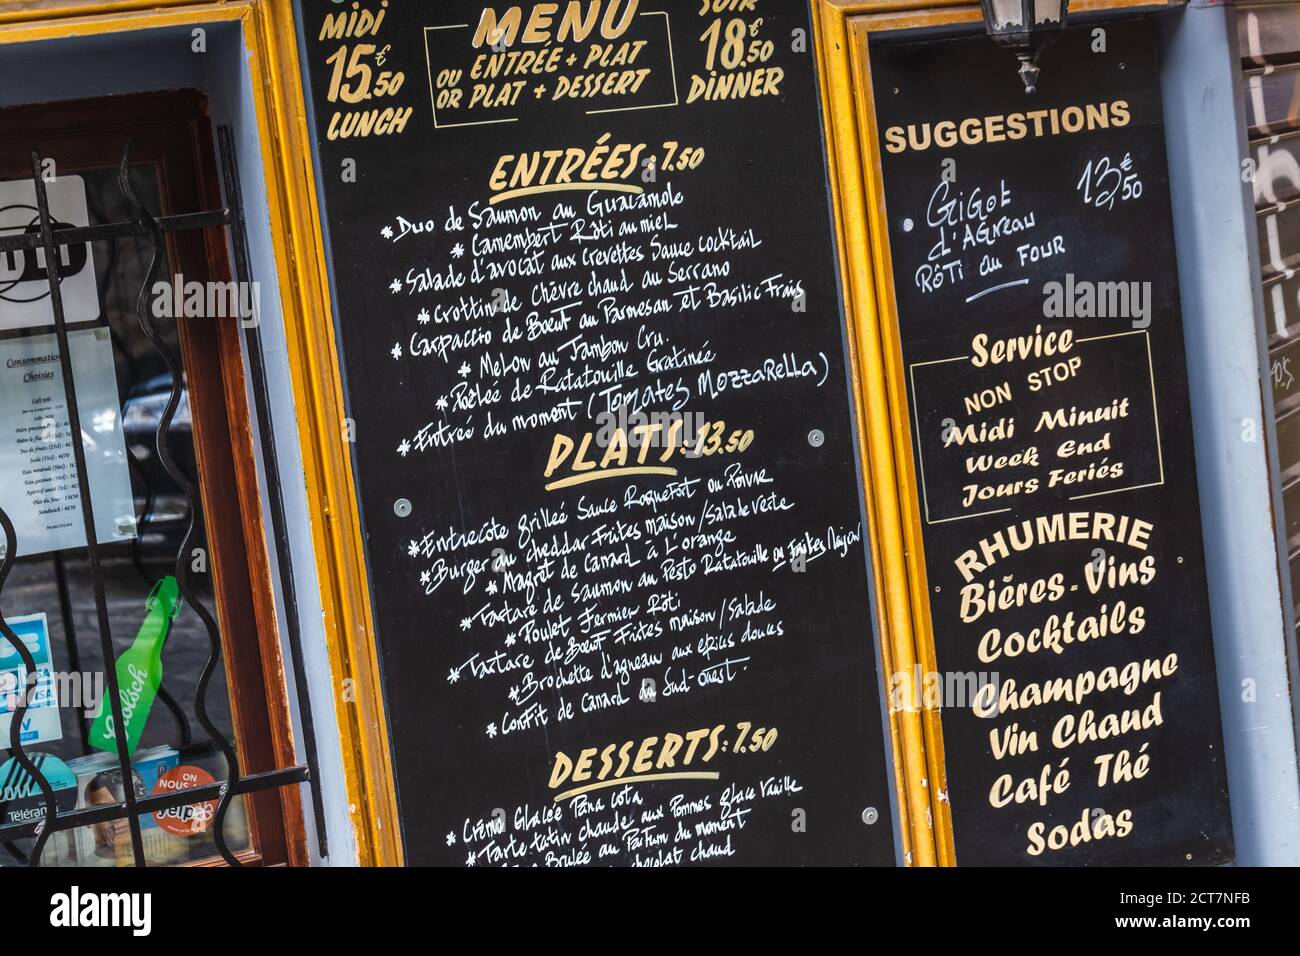 Menu of the restaurant of the local cafe. Paris, France - July 28 2018 ...